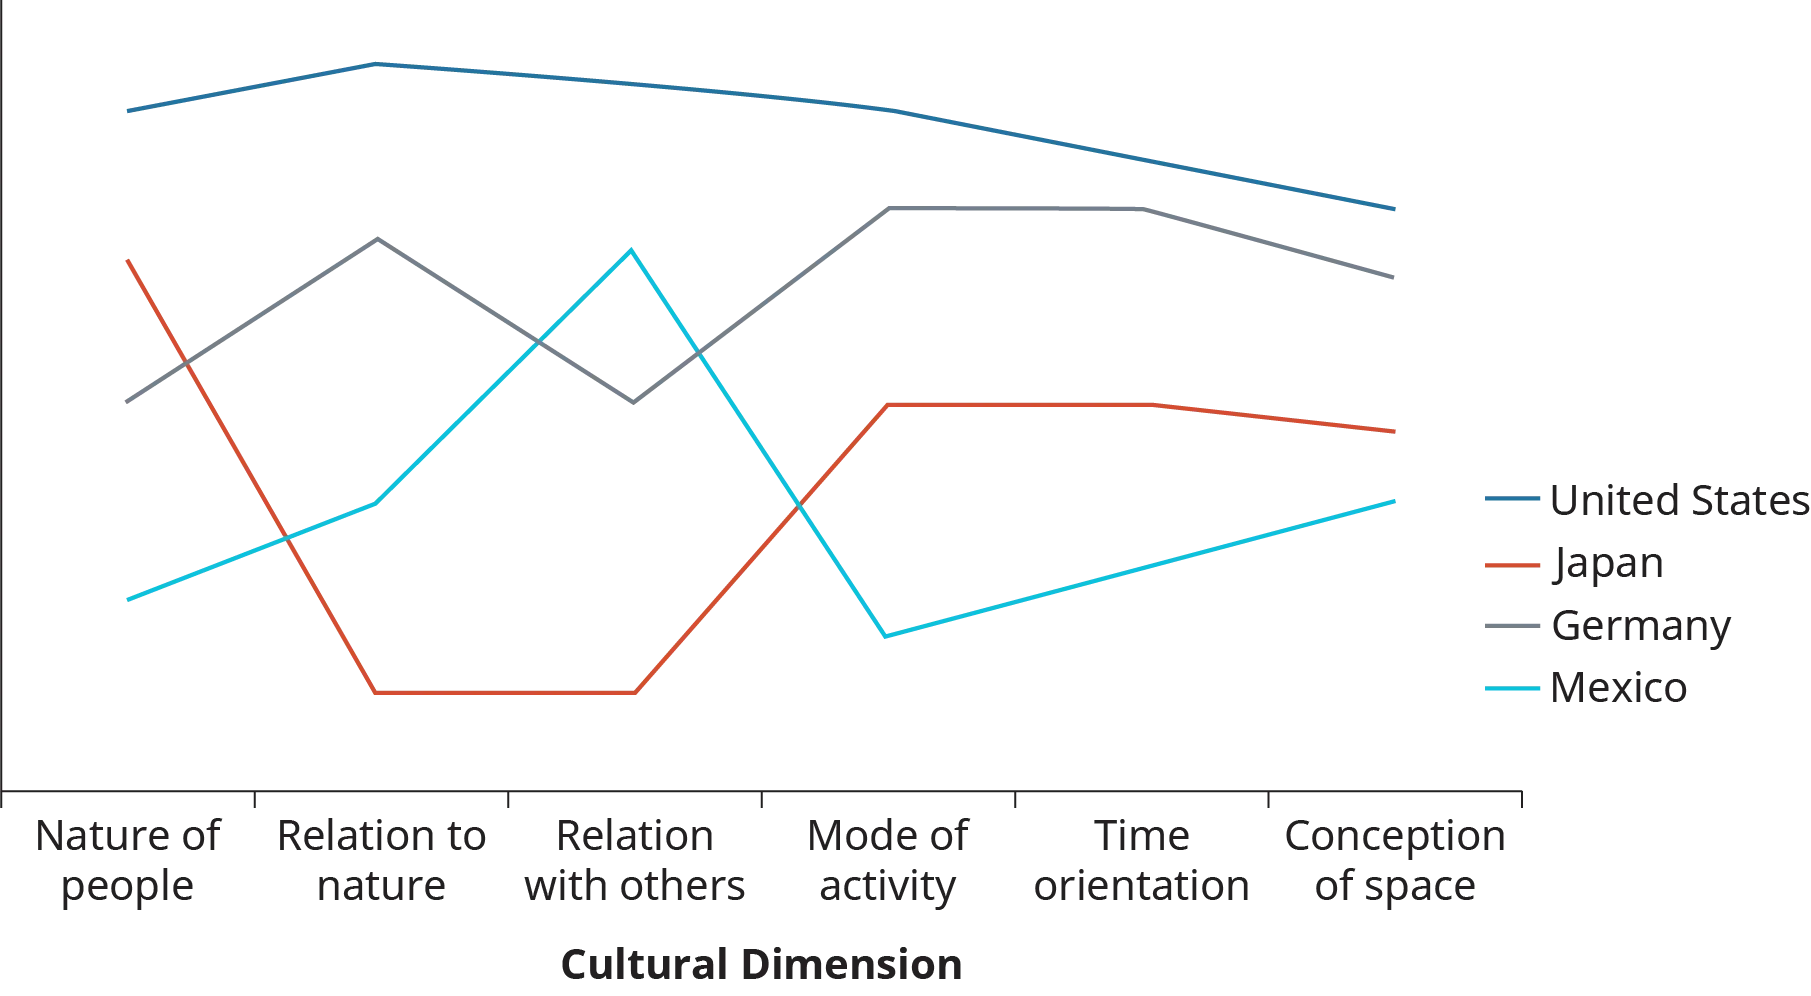 A multiple line graph plots the cultural differences among managers in four countries, United States, Japan, Germany, and Mexico.